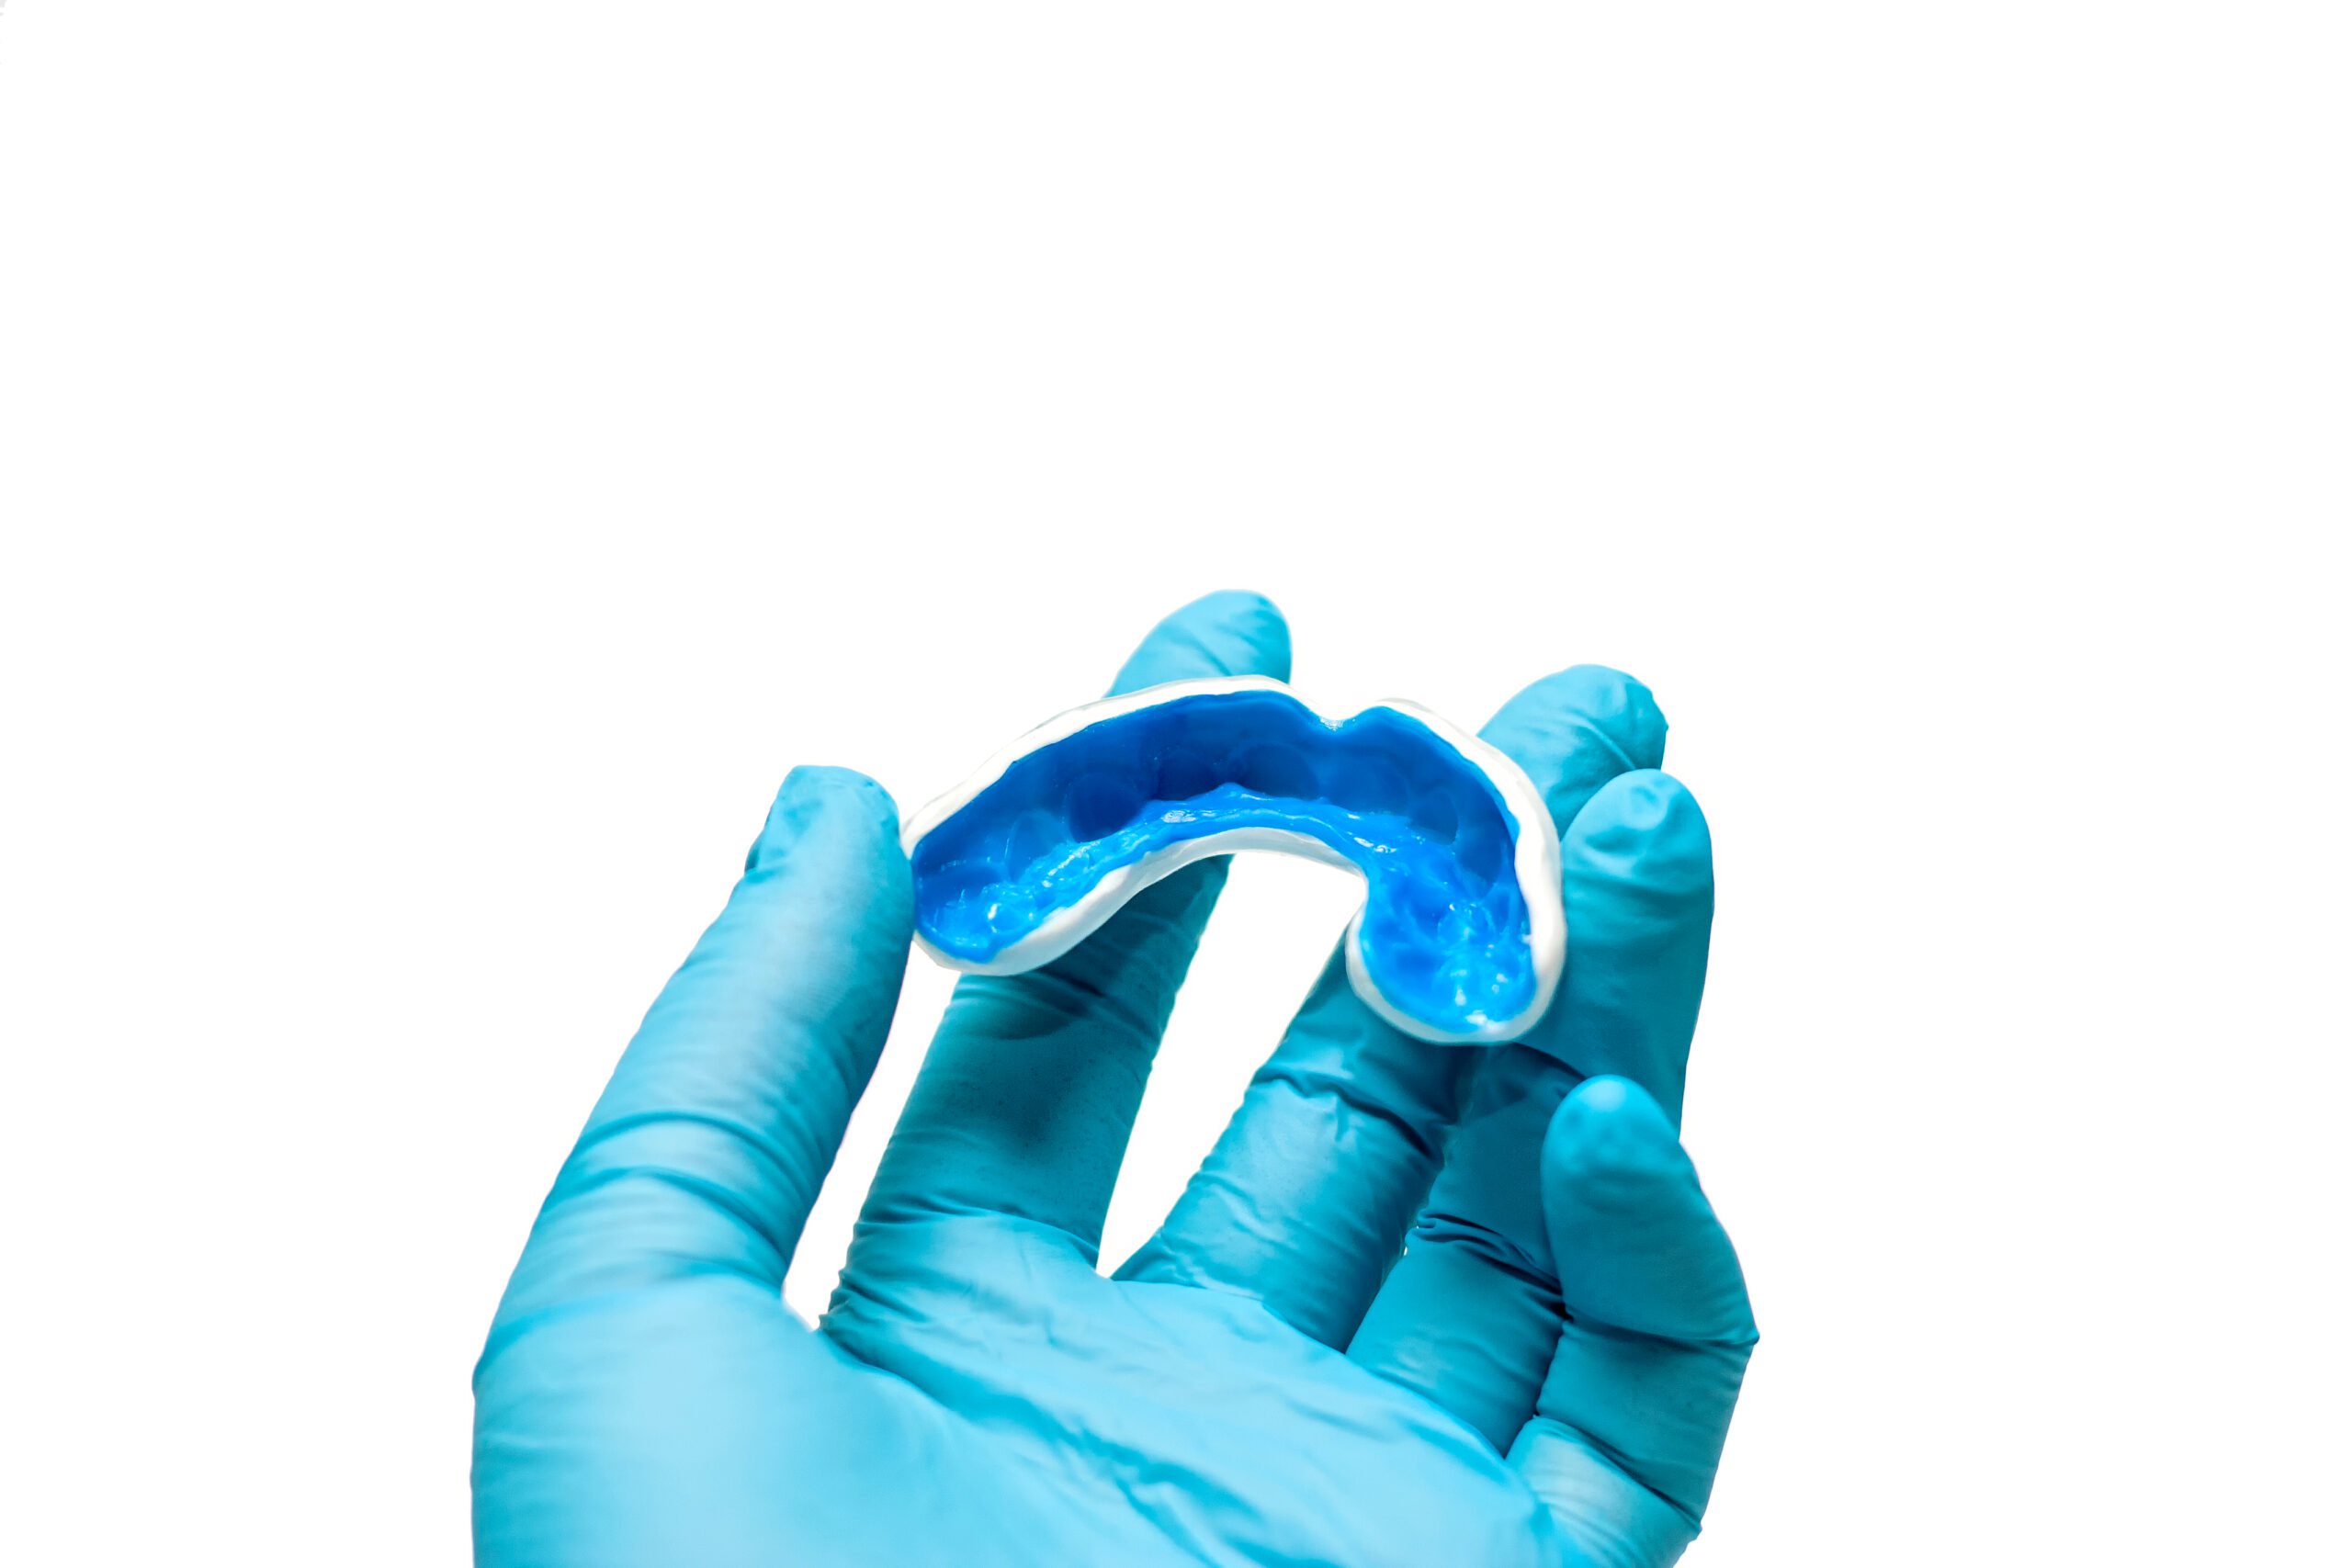 A white custom mouthguard for contact sports